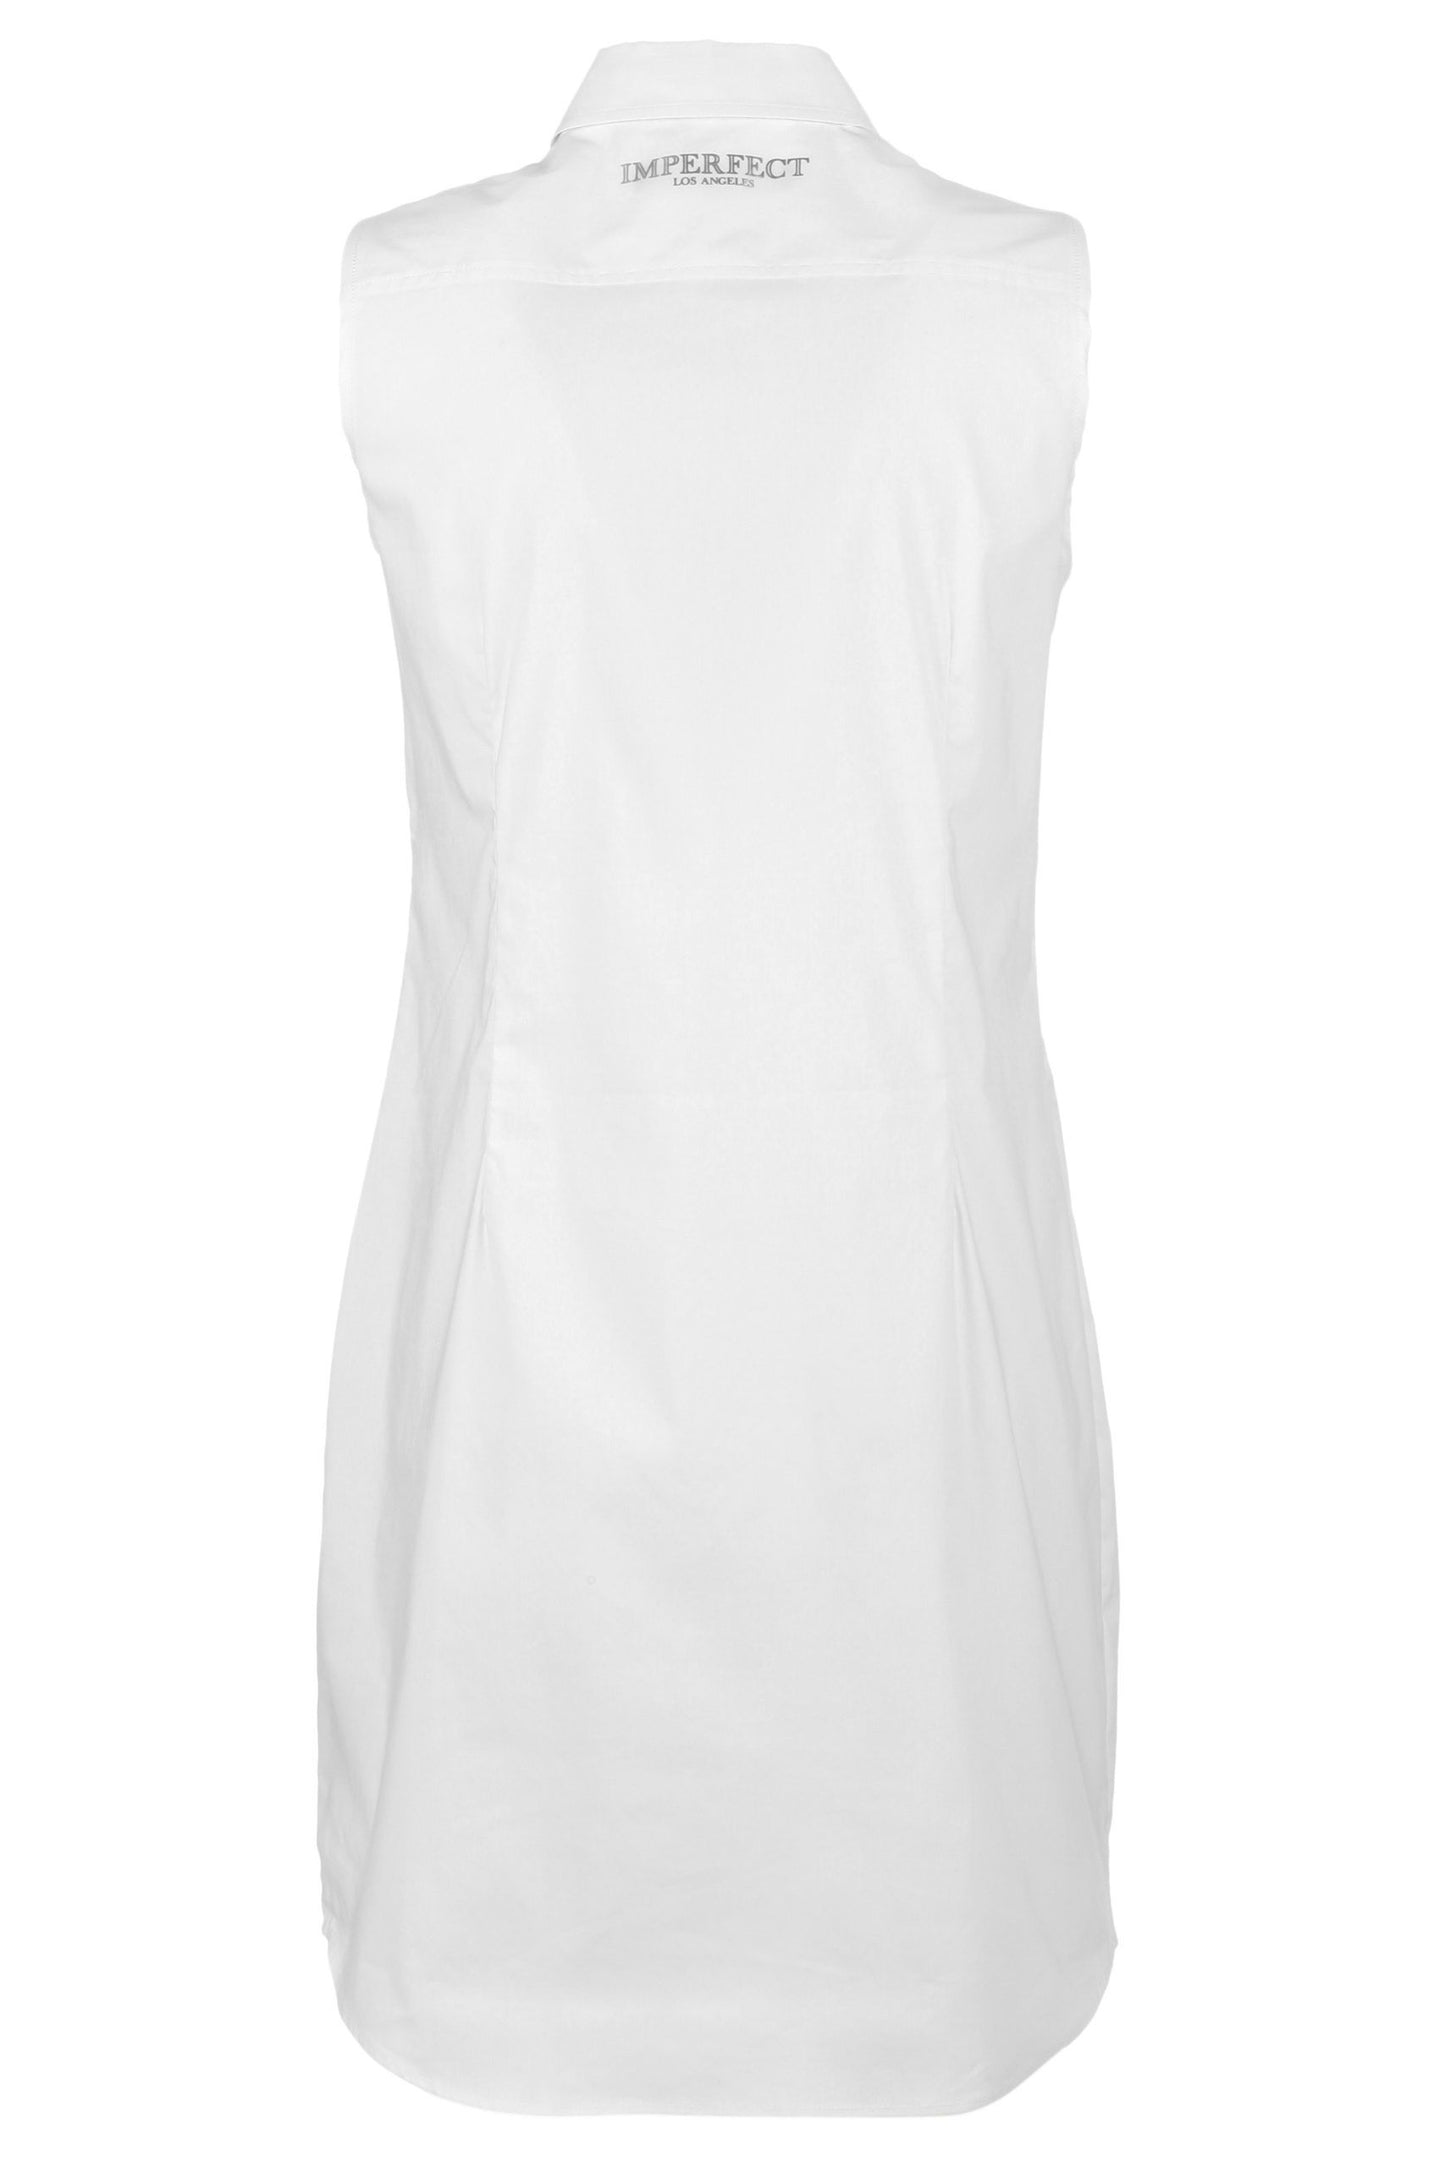 Chic Sleeveless White Blouse with Metal Button Closure